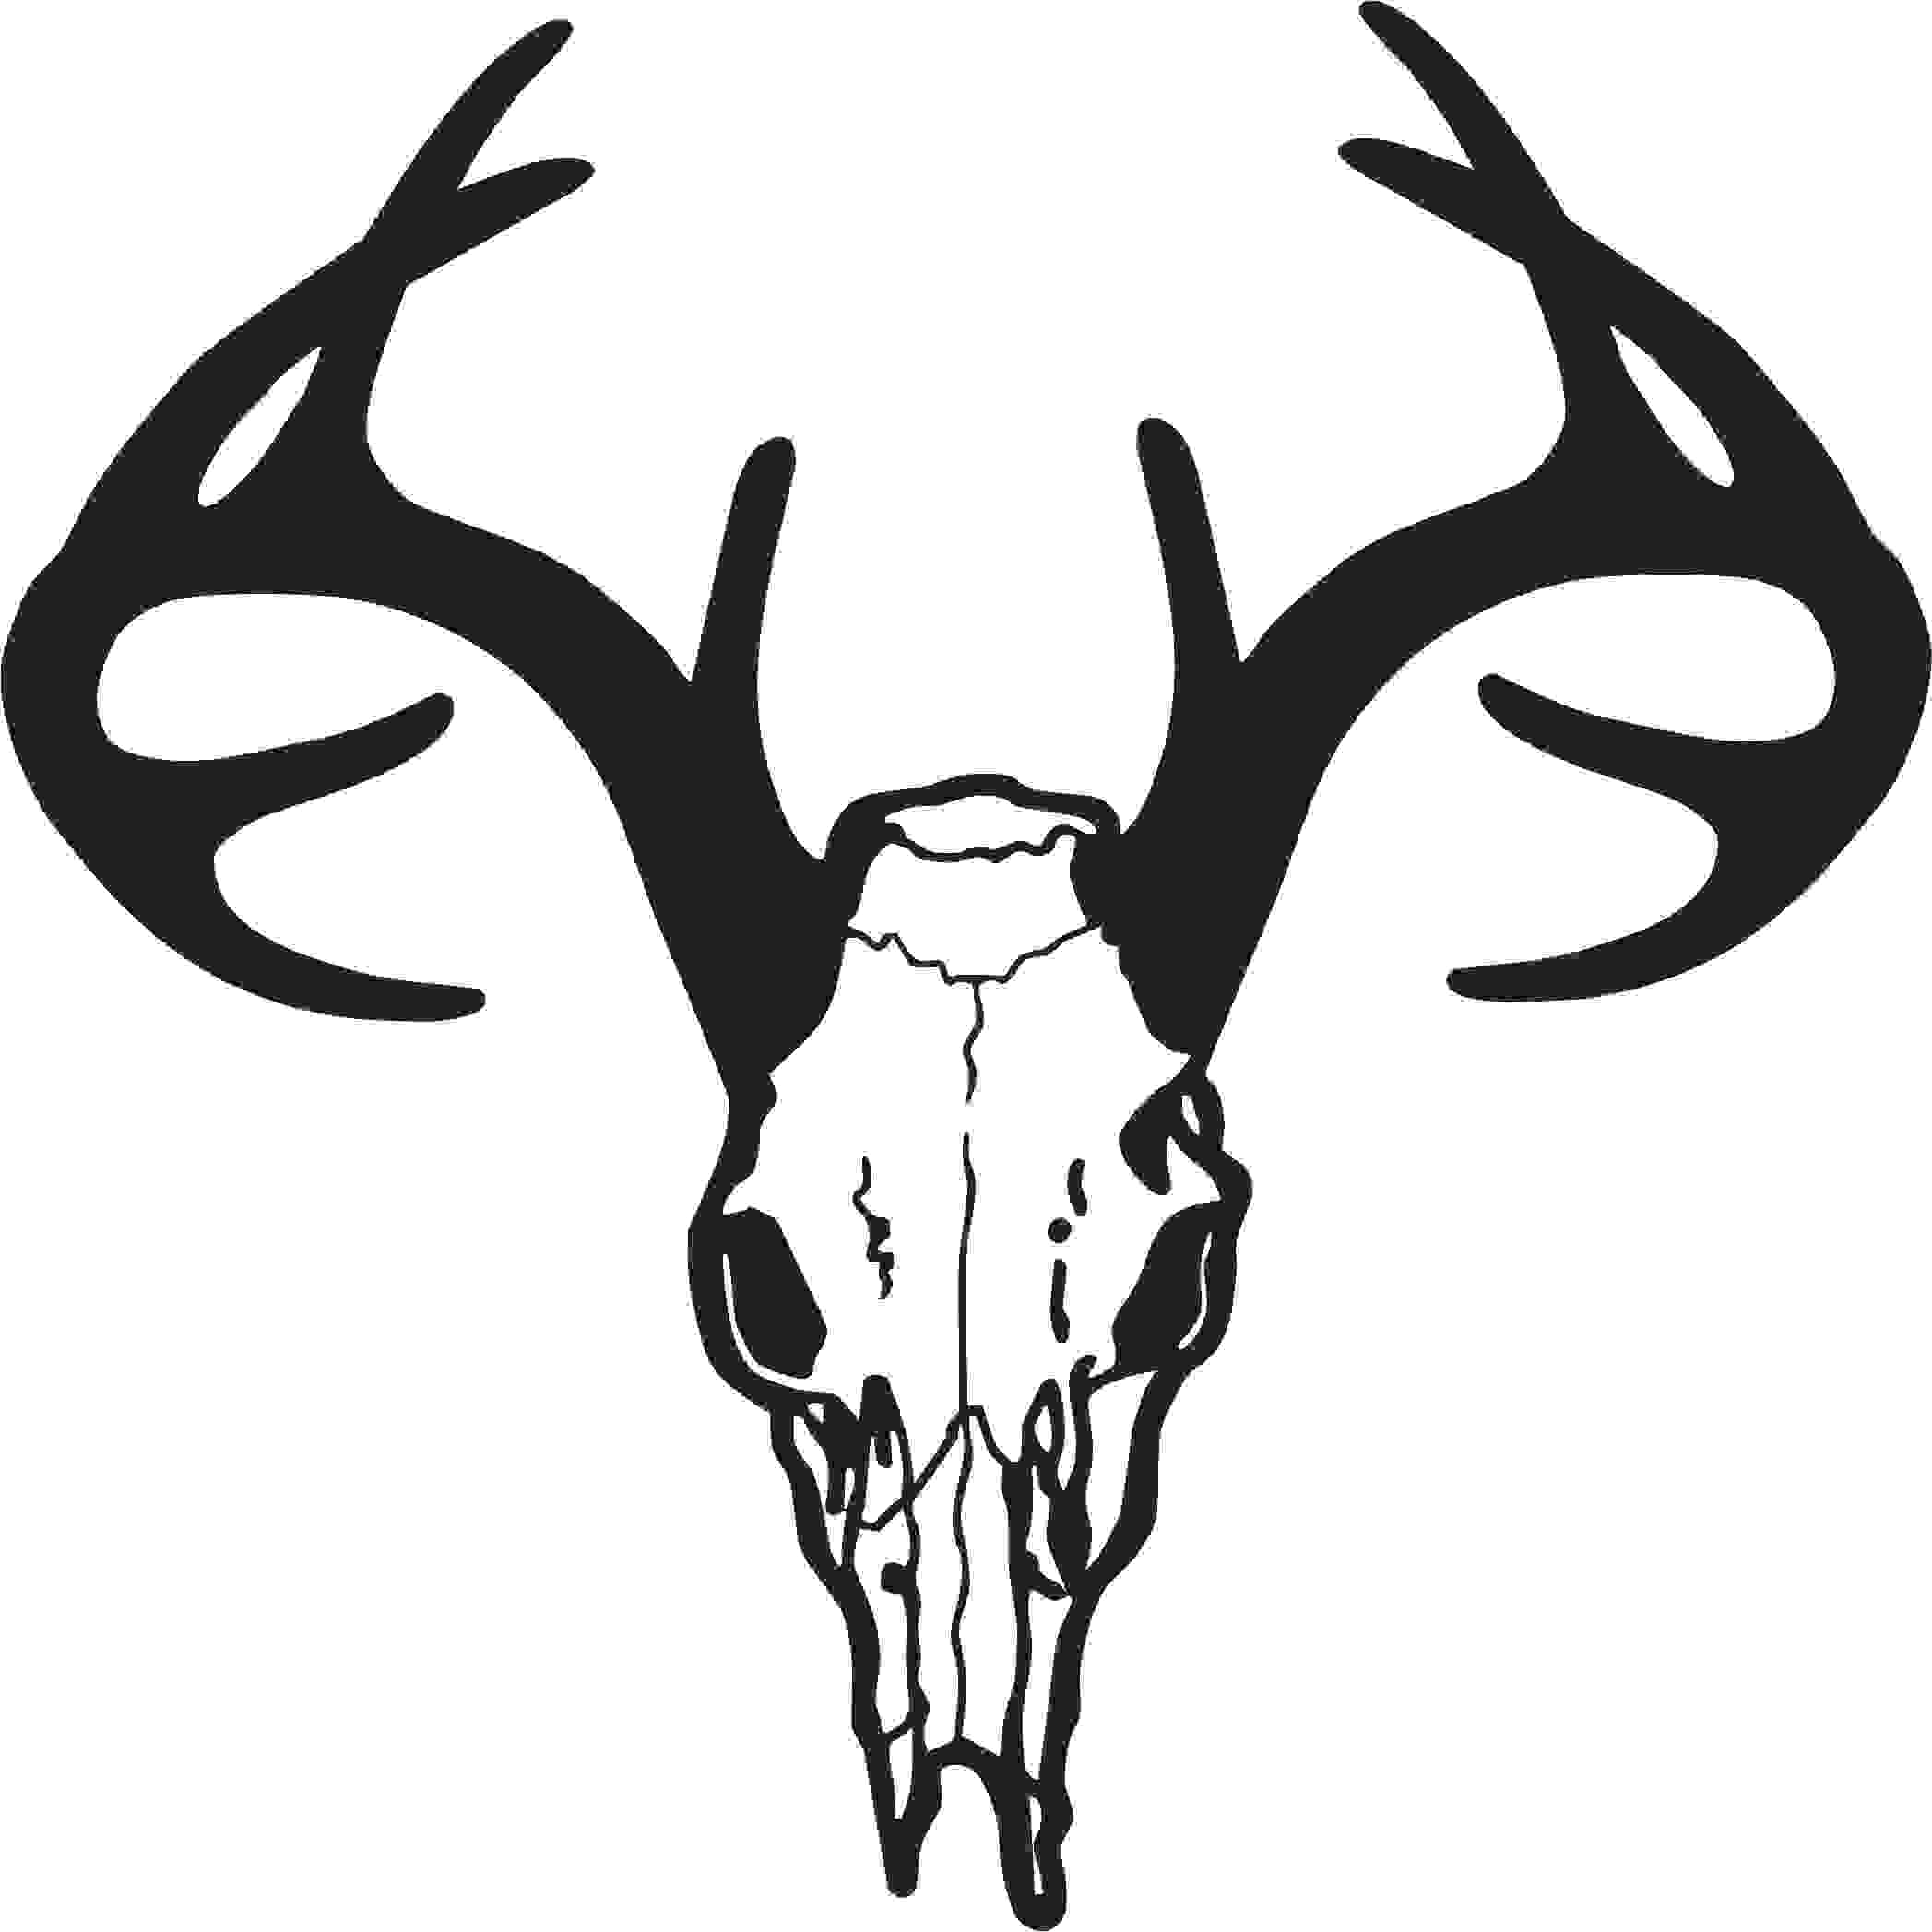 18 Deer Skull Silhouette Free Cliparts That You Can Download To You